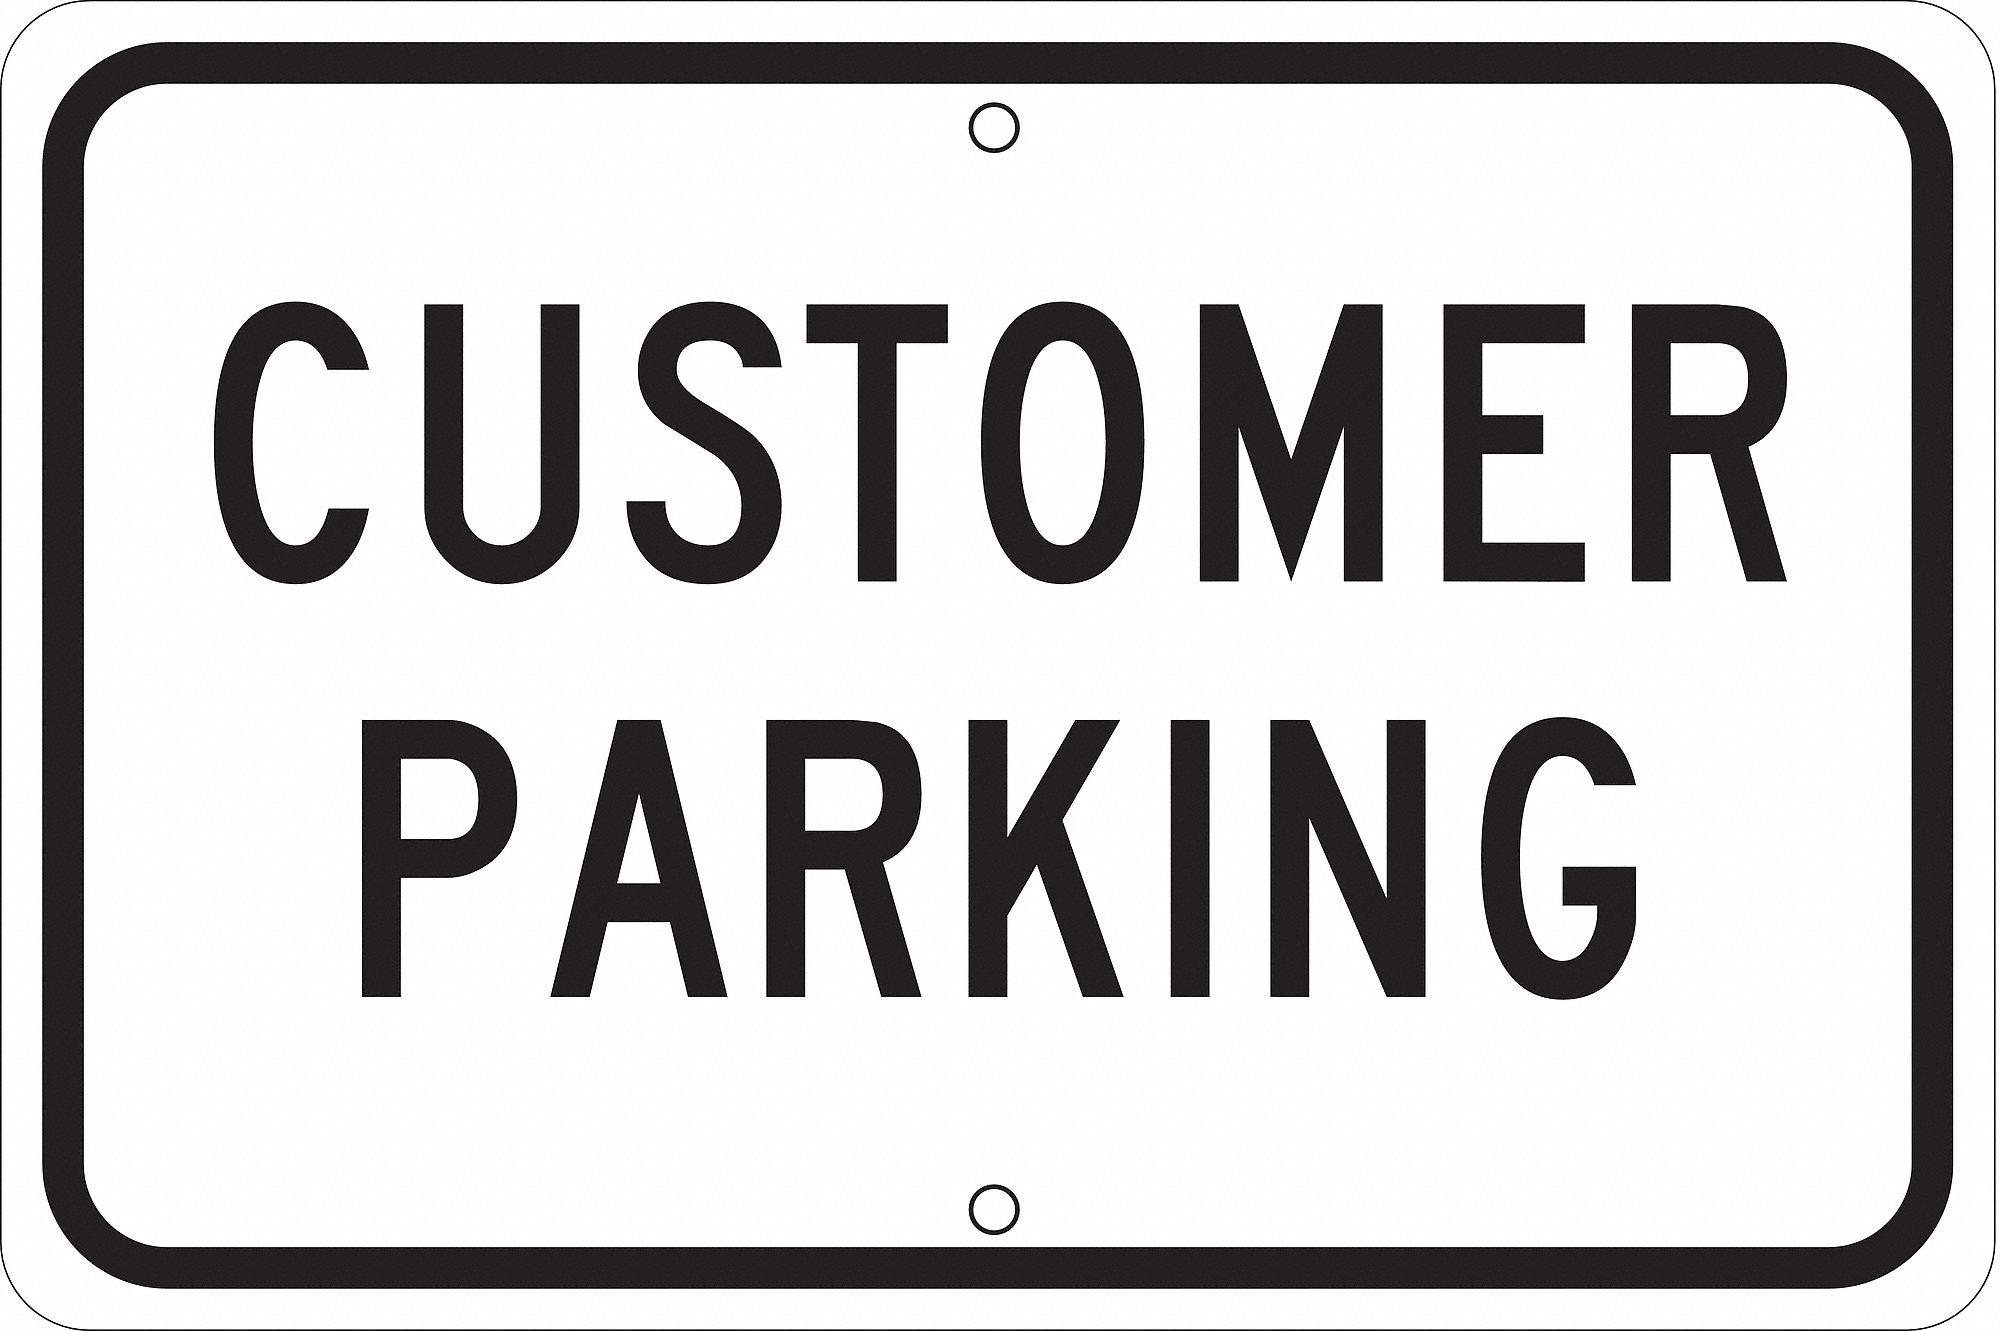 BRADY Text Customer Parking, Aluminum Parking Sign, Height 10", Width 14"   Parking and Traffic Signs   6B376|43424